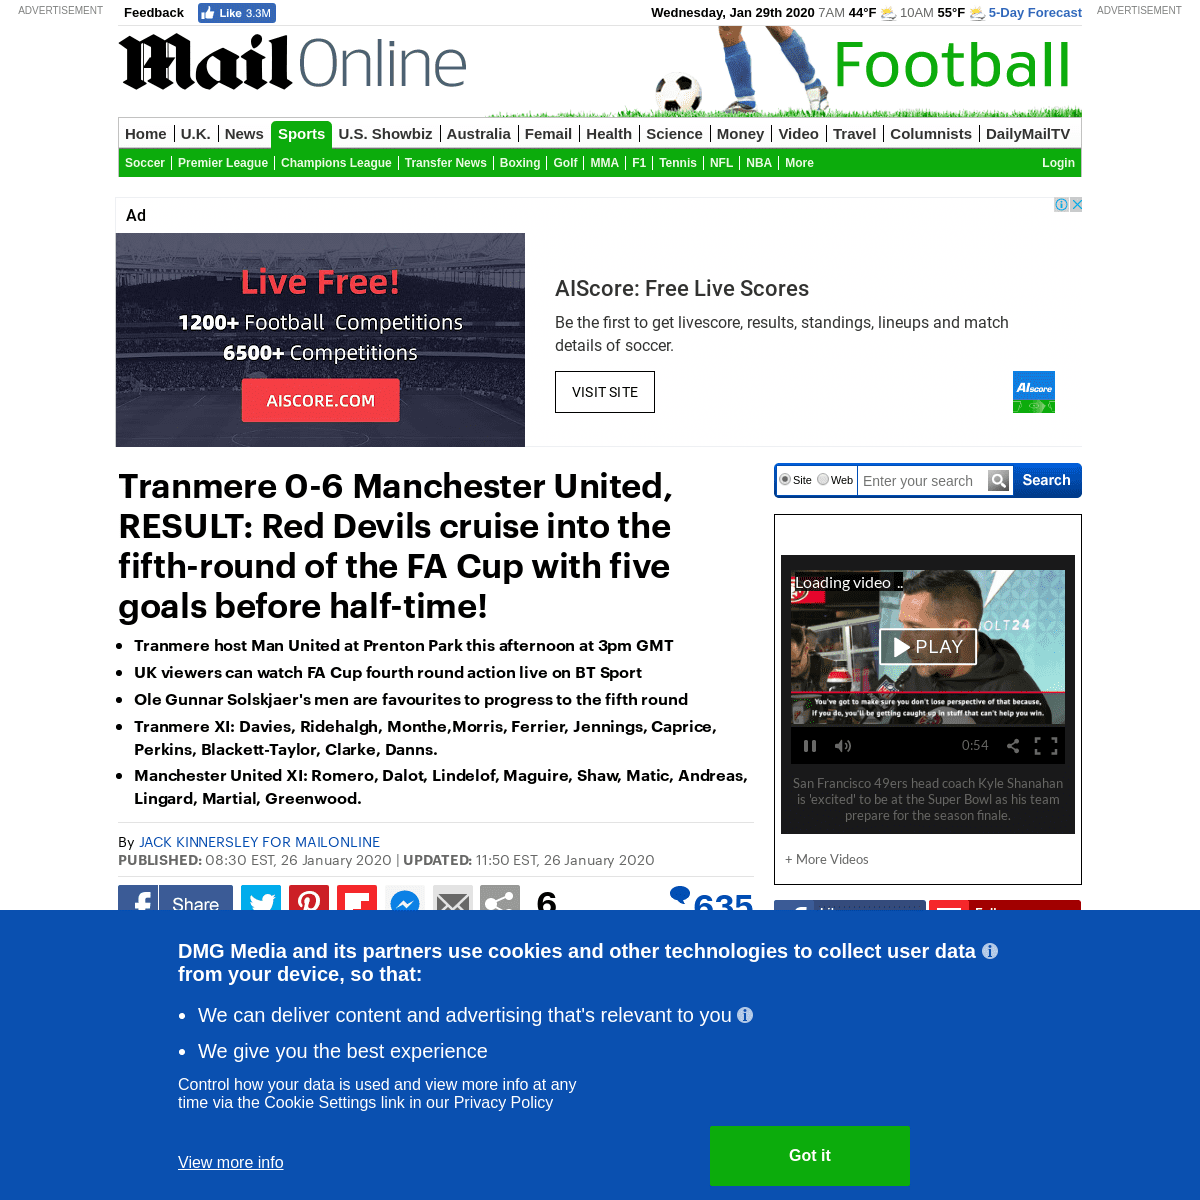 A complete backup of www.dailymail.co.uk/sport/football/article-7930847/Tranmere-vs-Manchester-United-FA-Cup-Fourth-Round-Live-s